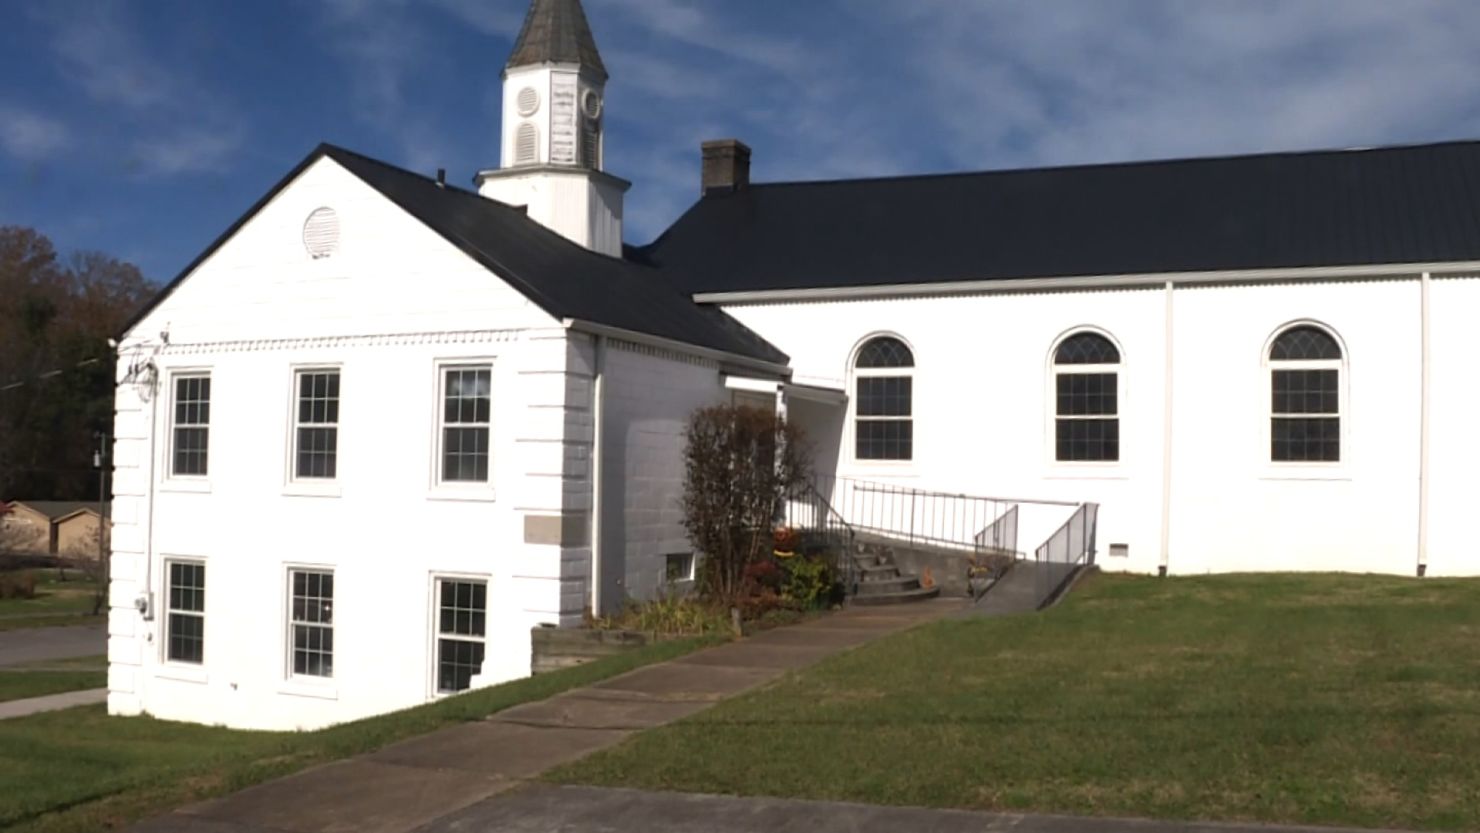 Tellico Plains, Tennessee, police say a weapon accidentally went off during a church discussion on gun safety, two people were injured in the incident